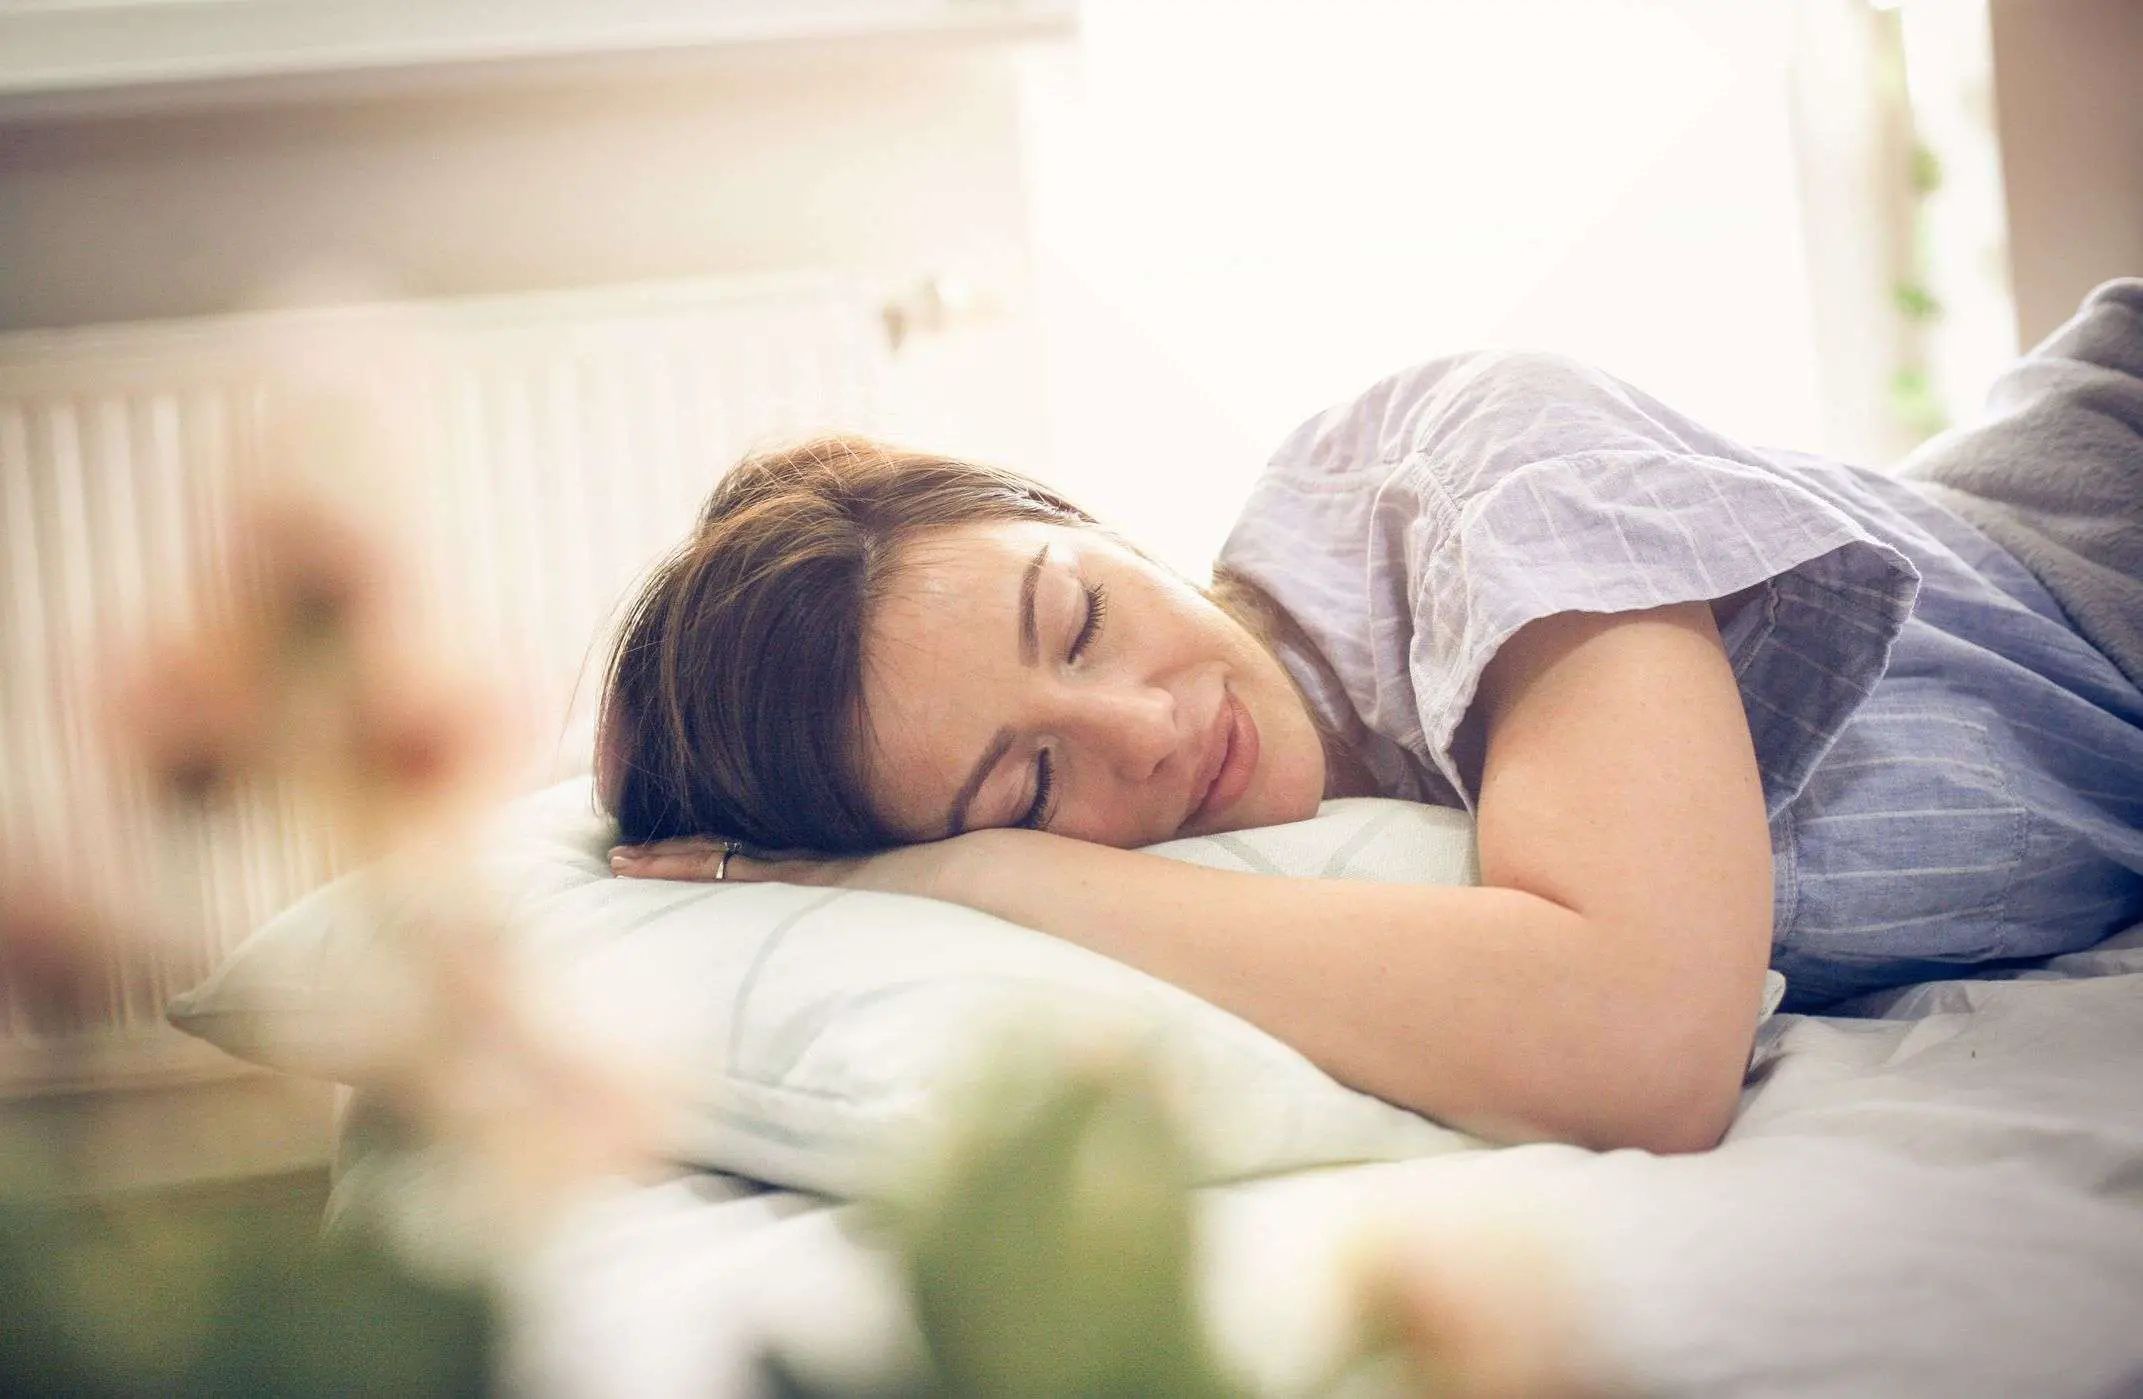 6 Sleep Habits That Can Help You Lose Weight